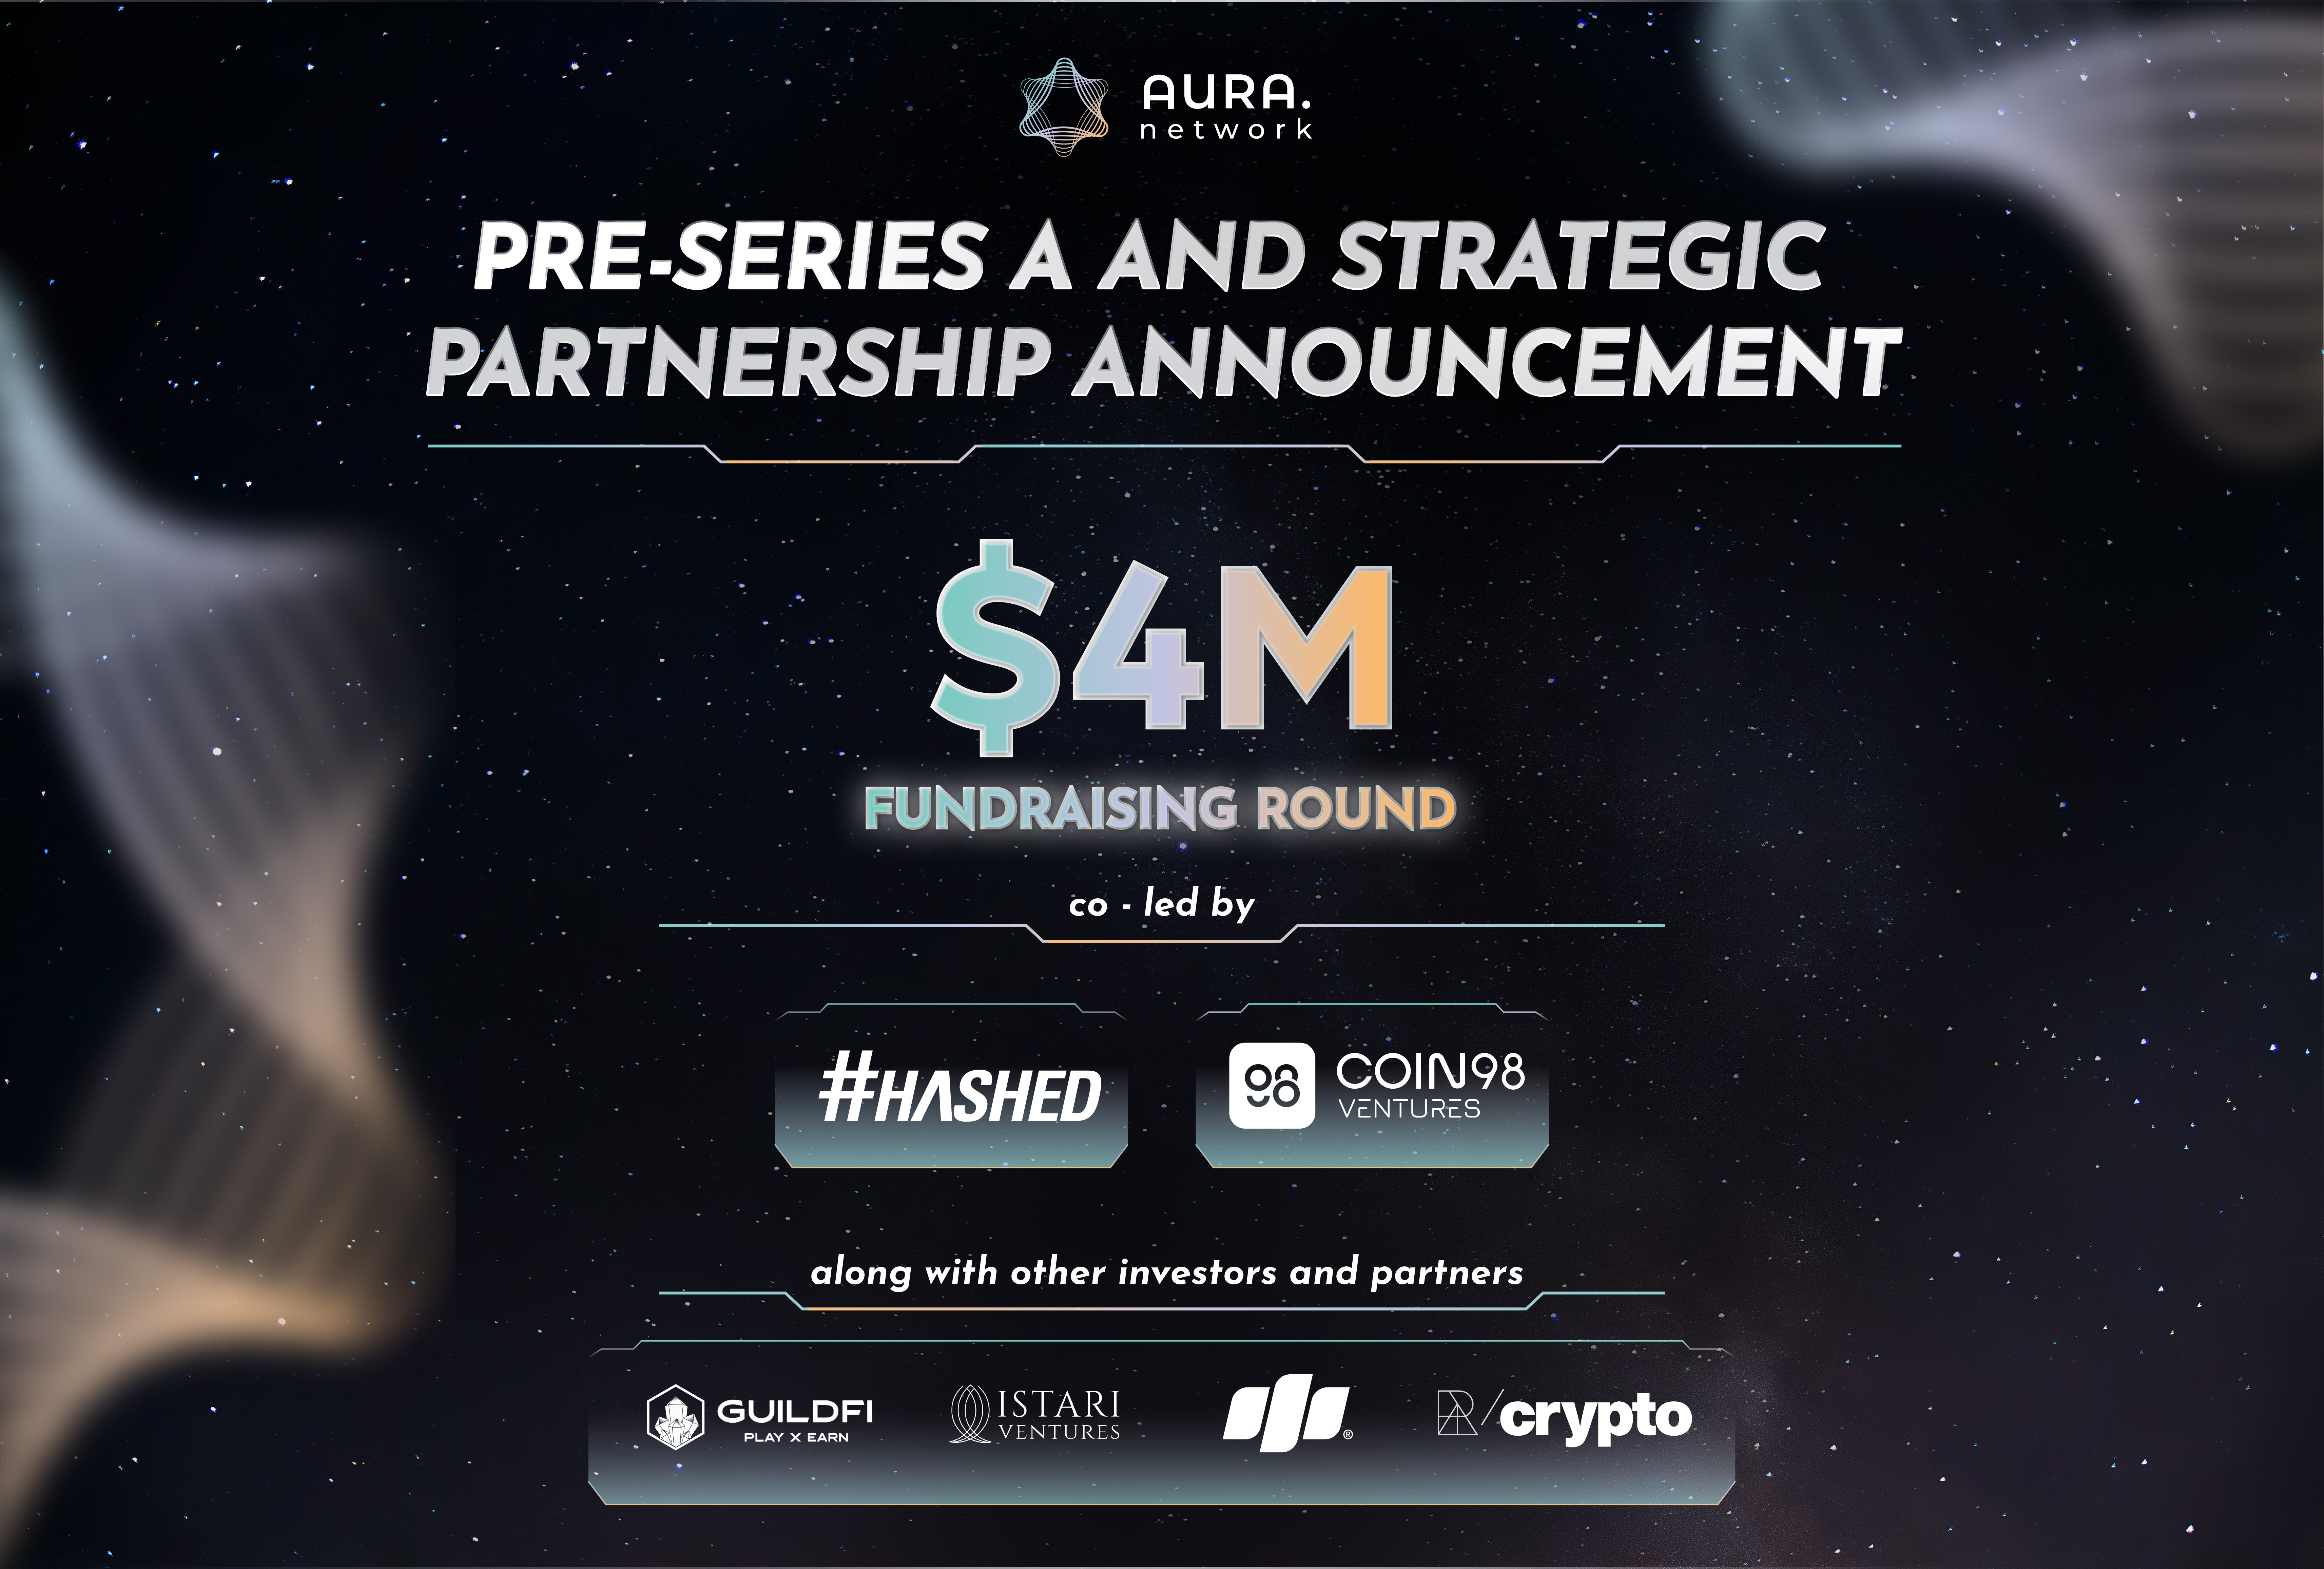 Aura Network Raised $4M in Pre-Series A Funding Round Led by